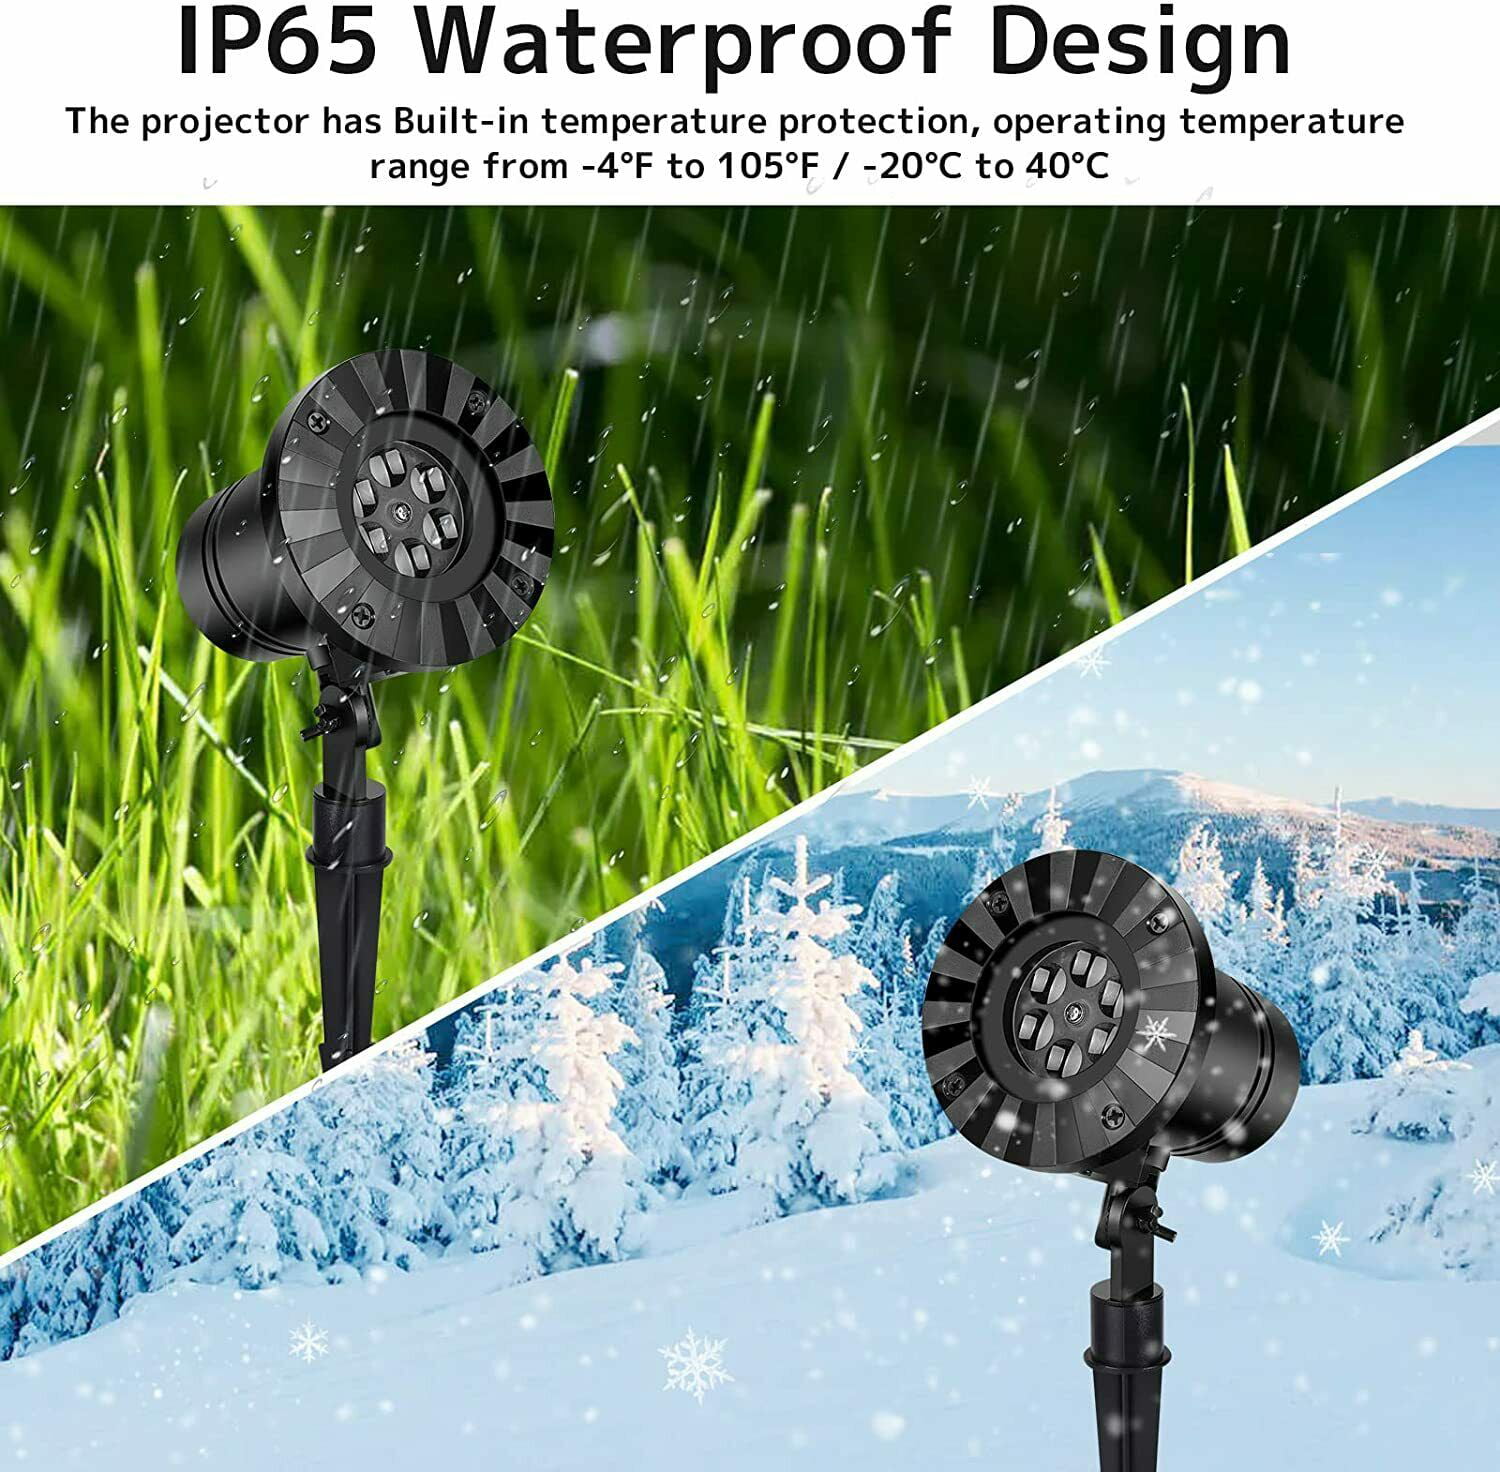 ARGIGU WL-602W Snowfall Christmas Light Projector, Indoor Outdoor Holiday  Projector Lights with Remote Control, Rotating Snow Falling Projector